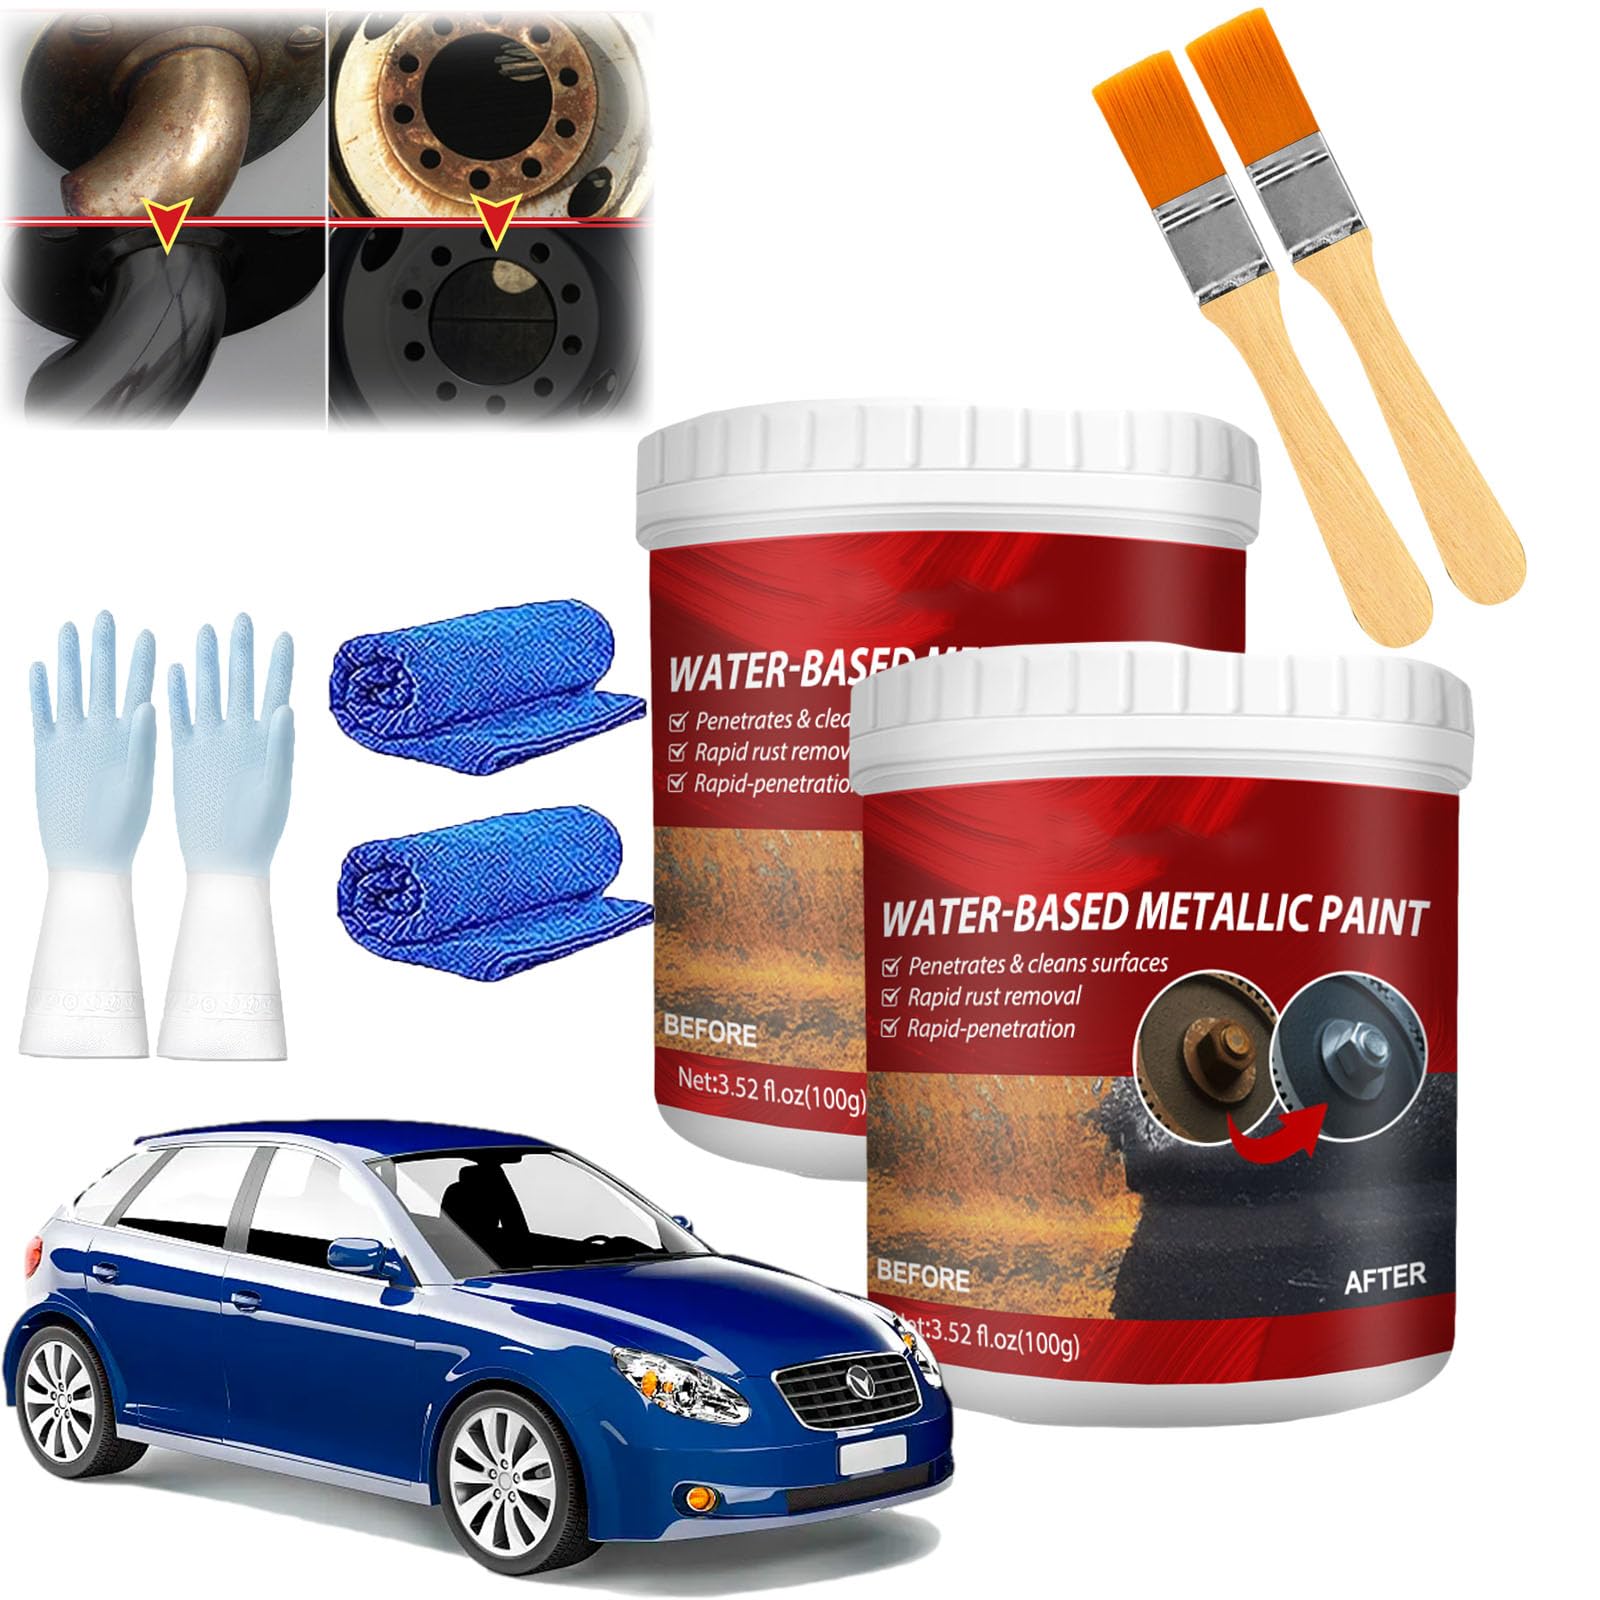 HOPASRISEE Rust Removal Converter Metallic Paint, Rust Remover Converter for Metal, Rust Paint Remover, Car Anti Rust Paint Chassis Universal Rust Removal Converter with Brush (300ML-1PC) von HOPASRISEE